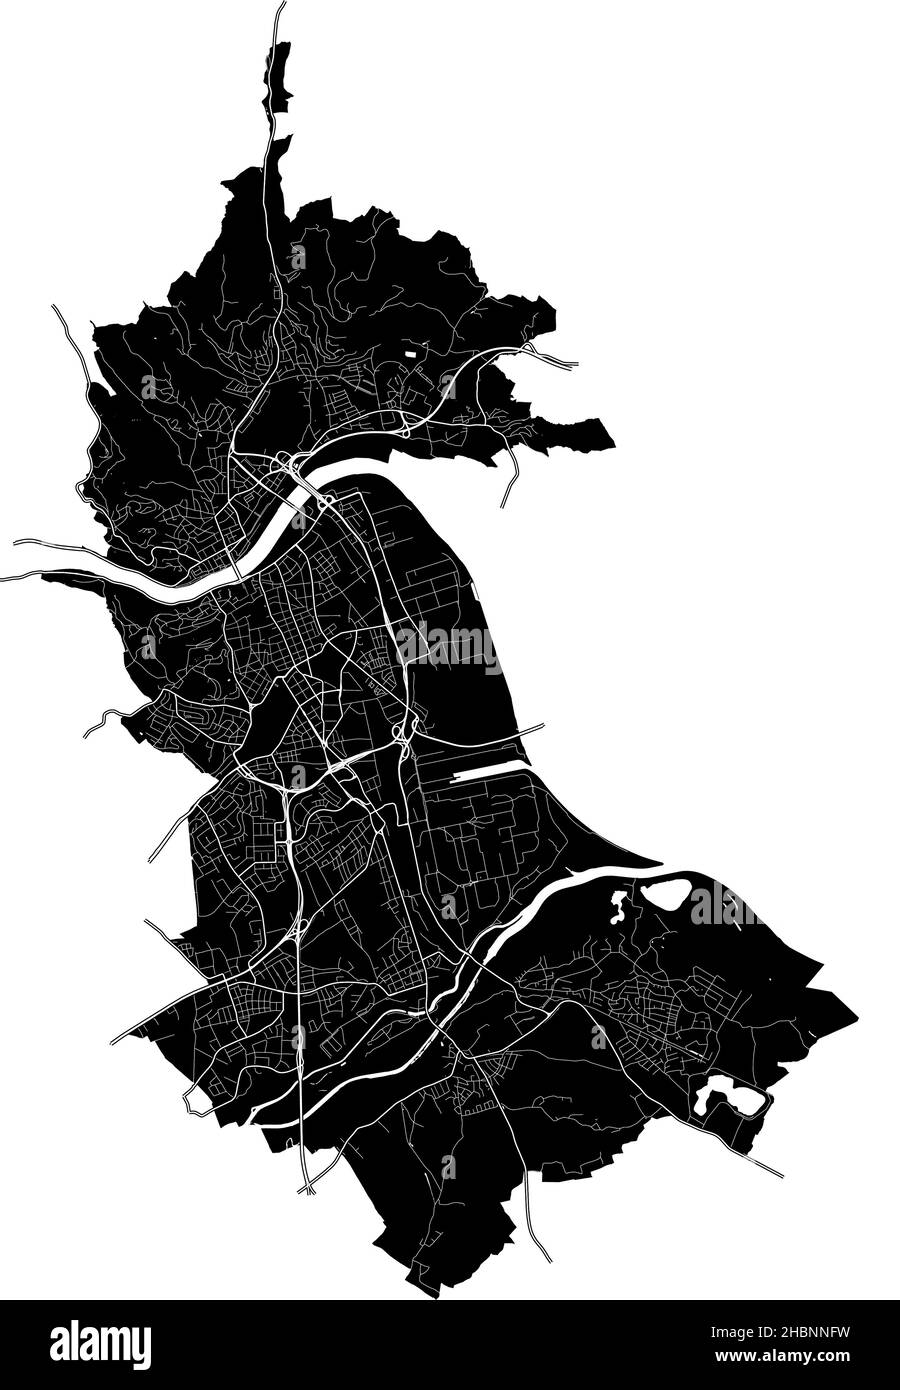 Linz, Austria, high resolution vector map with city boundaries, and editable paths. The city map was drawn with white areas and lines for main roads, Stock Vector